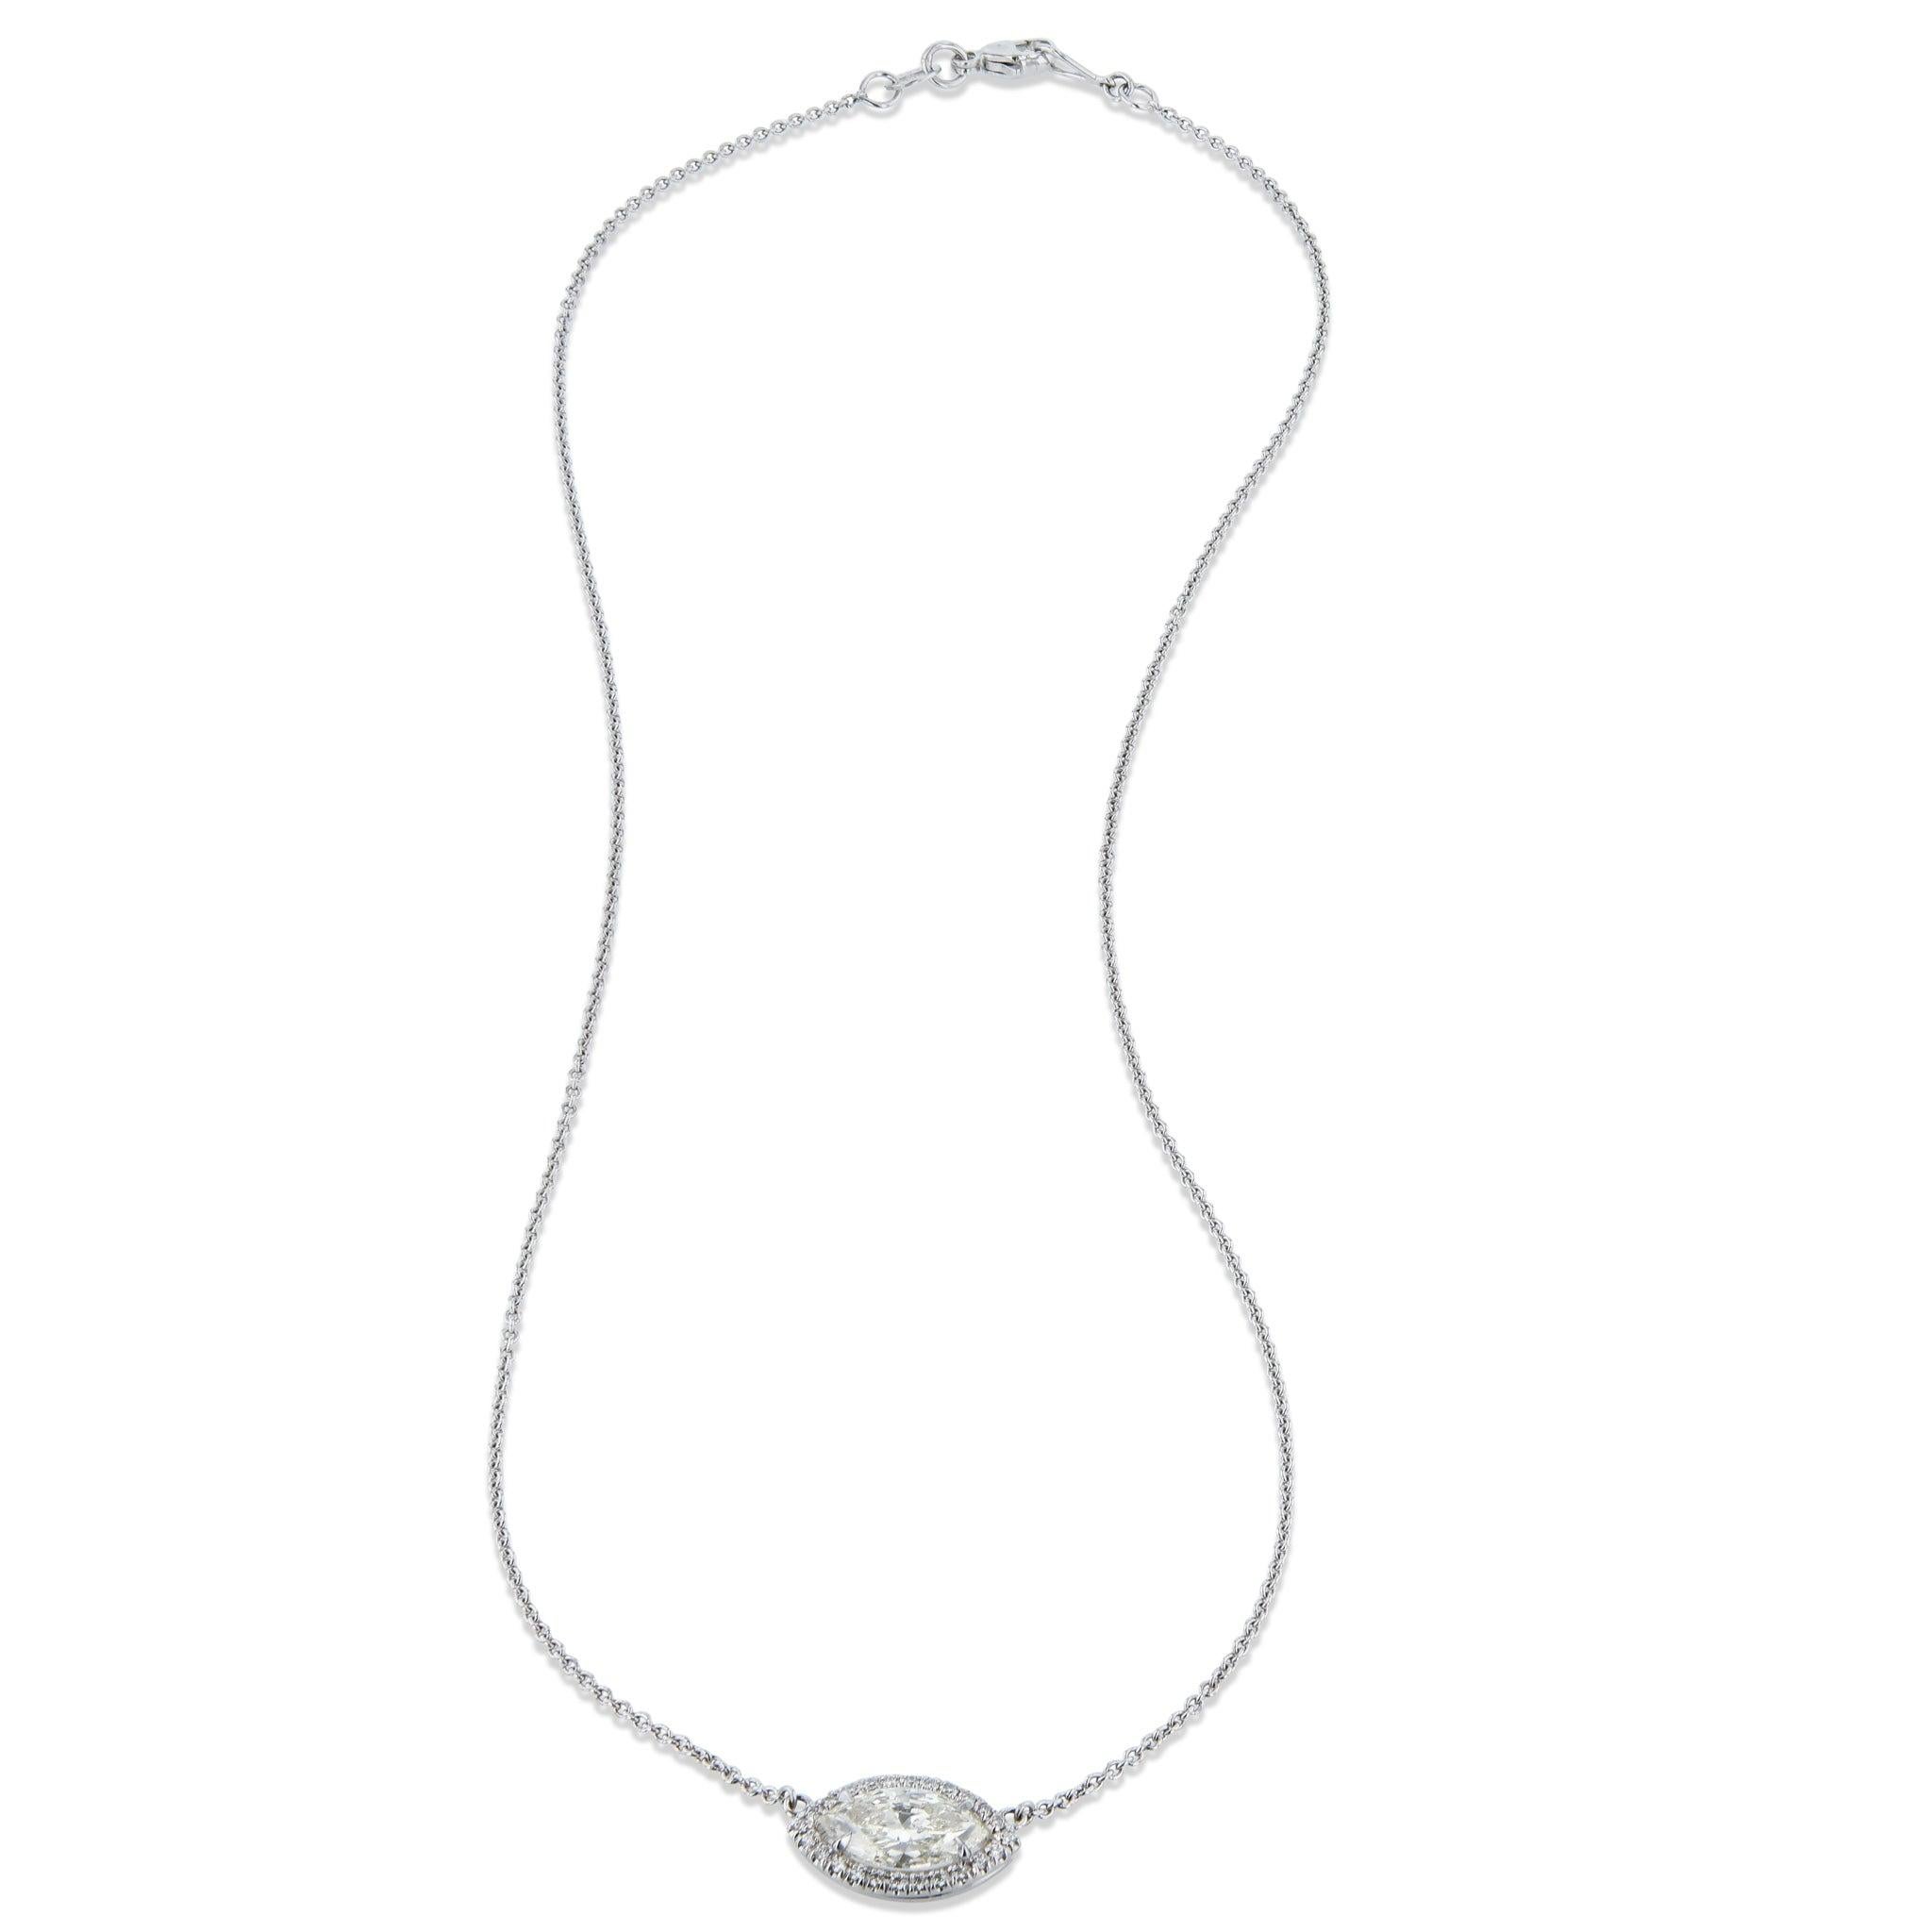 Indulge in the luxurious beauty of this sparkling White Gold Diamond Pave Pendant Necklace. A stunning center diamond nestled in 18K white gold takes center stage, surrounded by diamond pave handmade by H&H jewels.
White Gold Diamond Pave Pendant